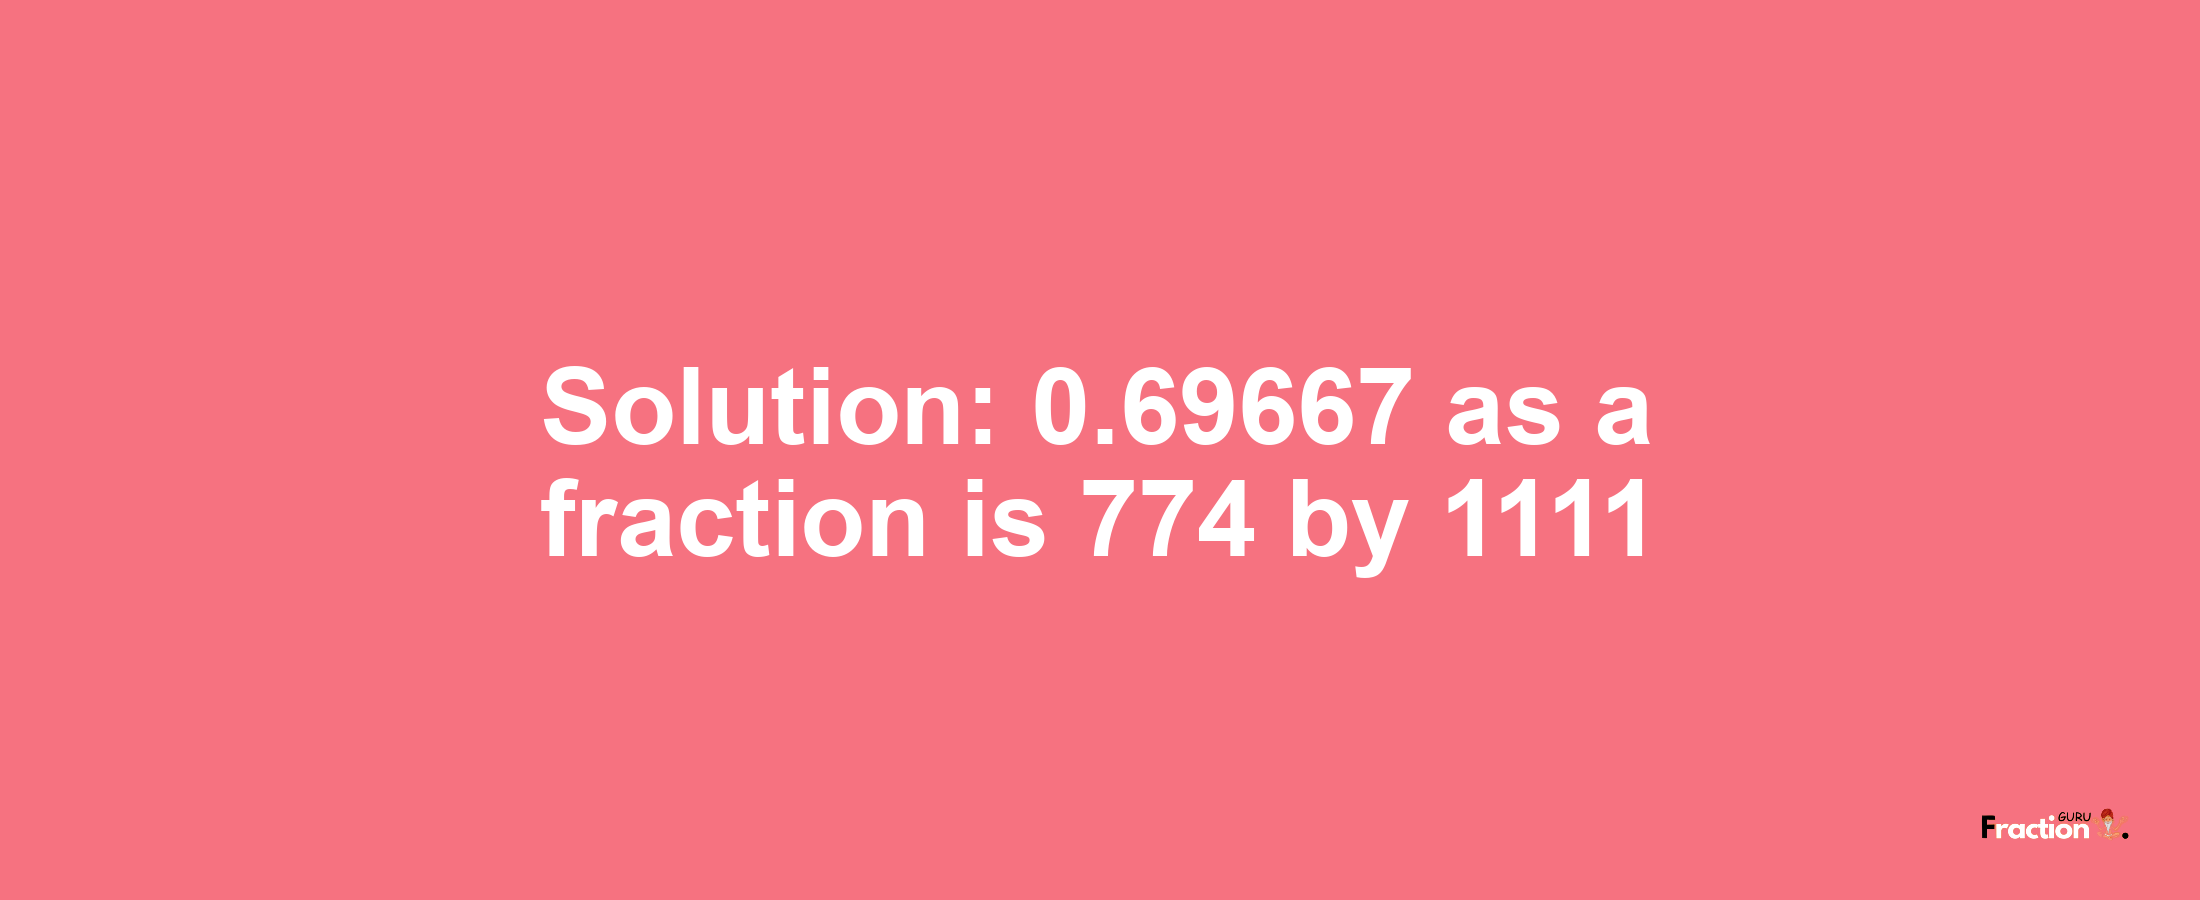 Solution:0.69667 as a fraction is 774/1111